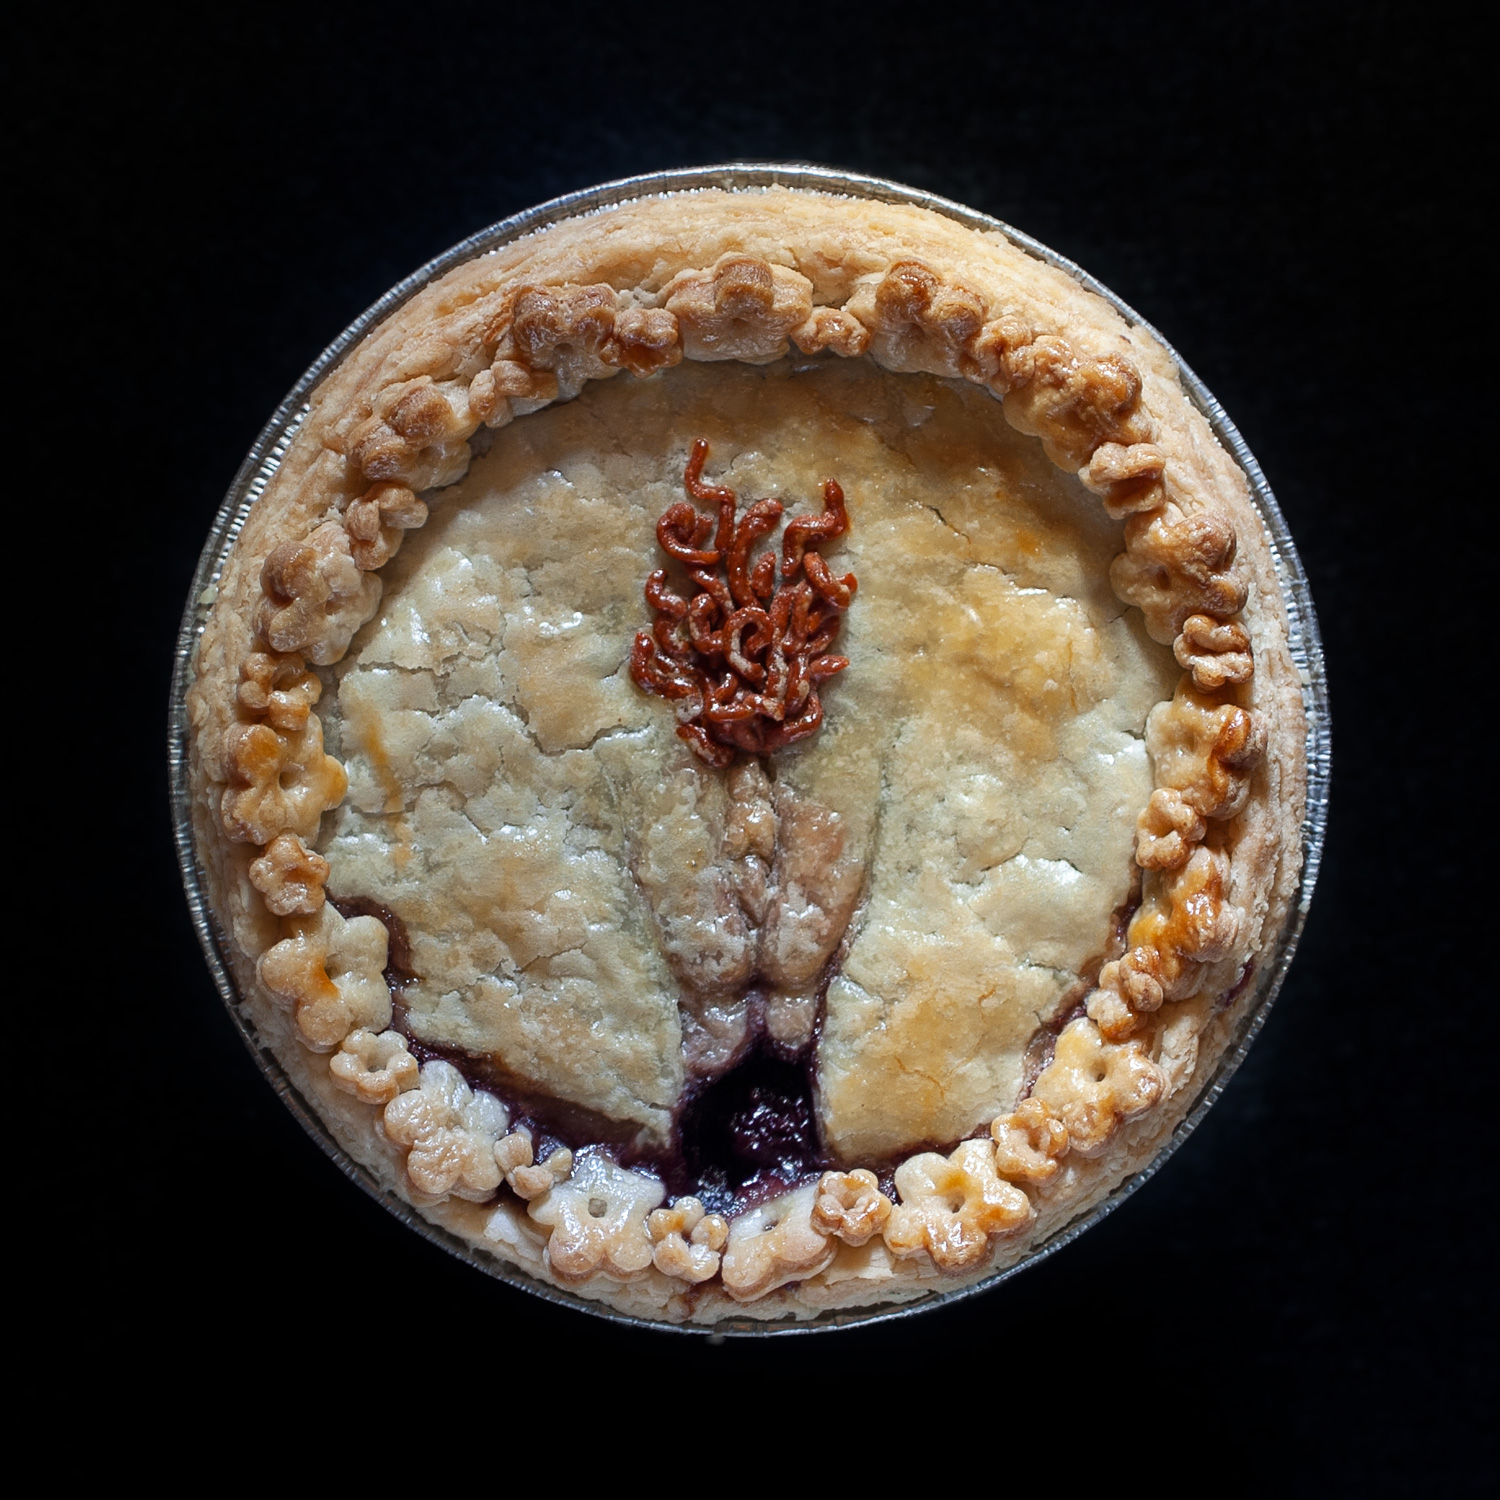 Baked six inch Cherry berry berry pie with hand sculpted pie crust art depicting a vulva with red pubic hair